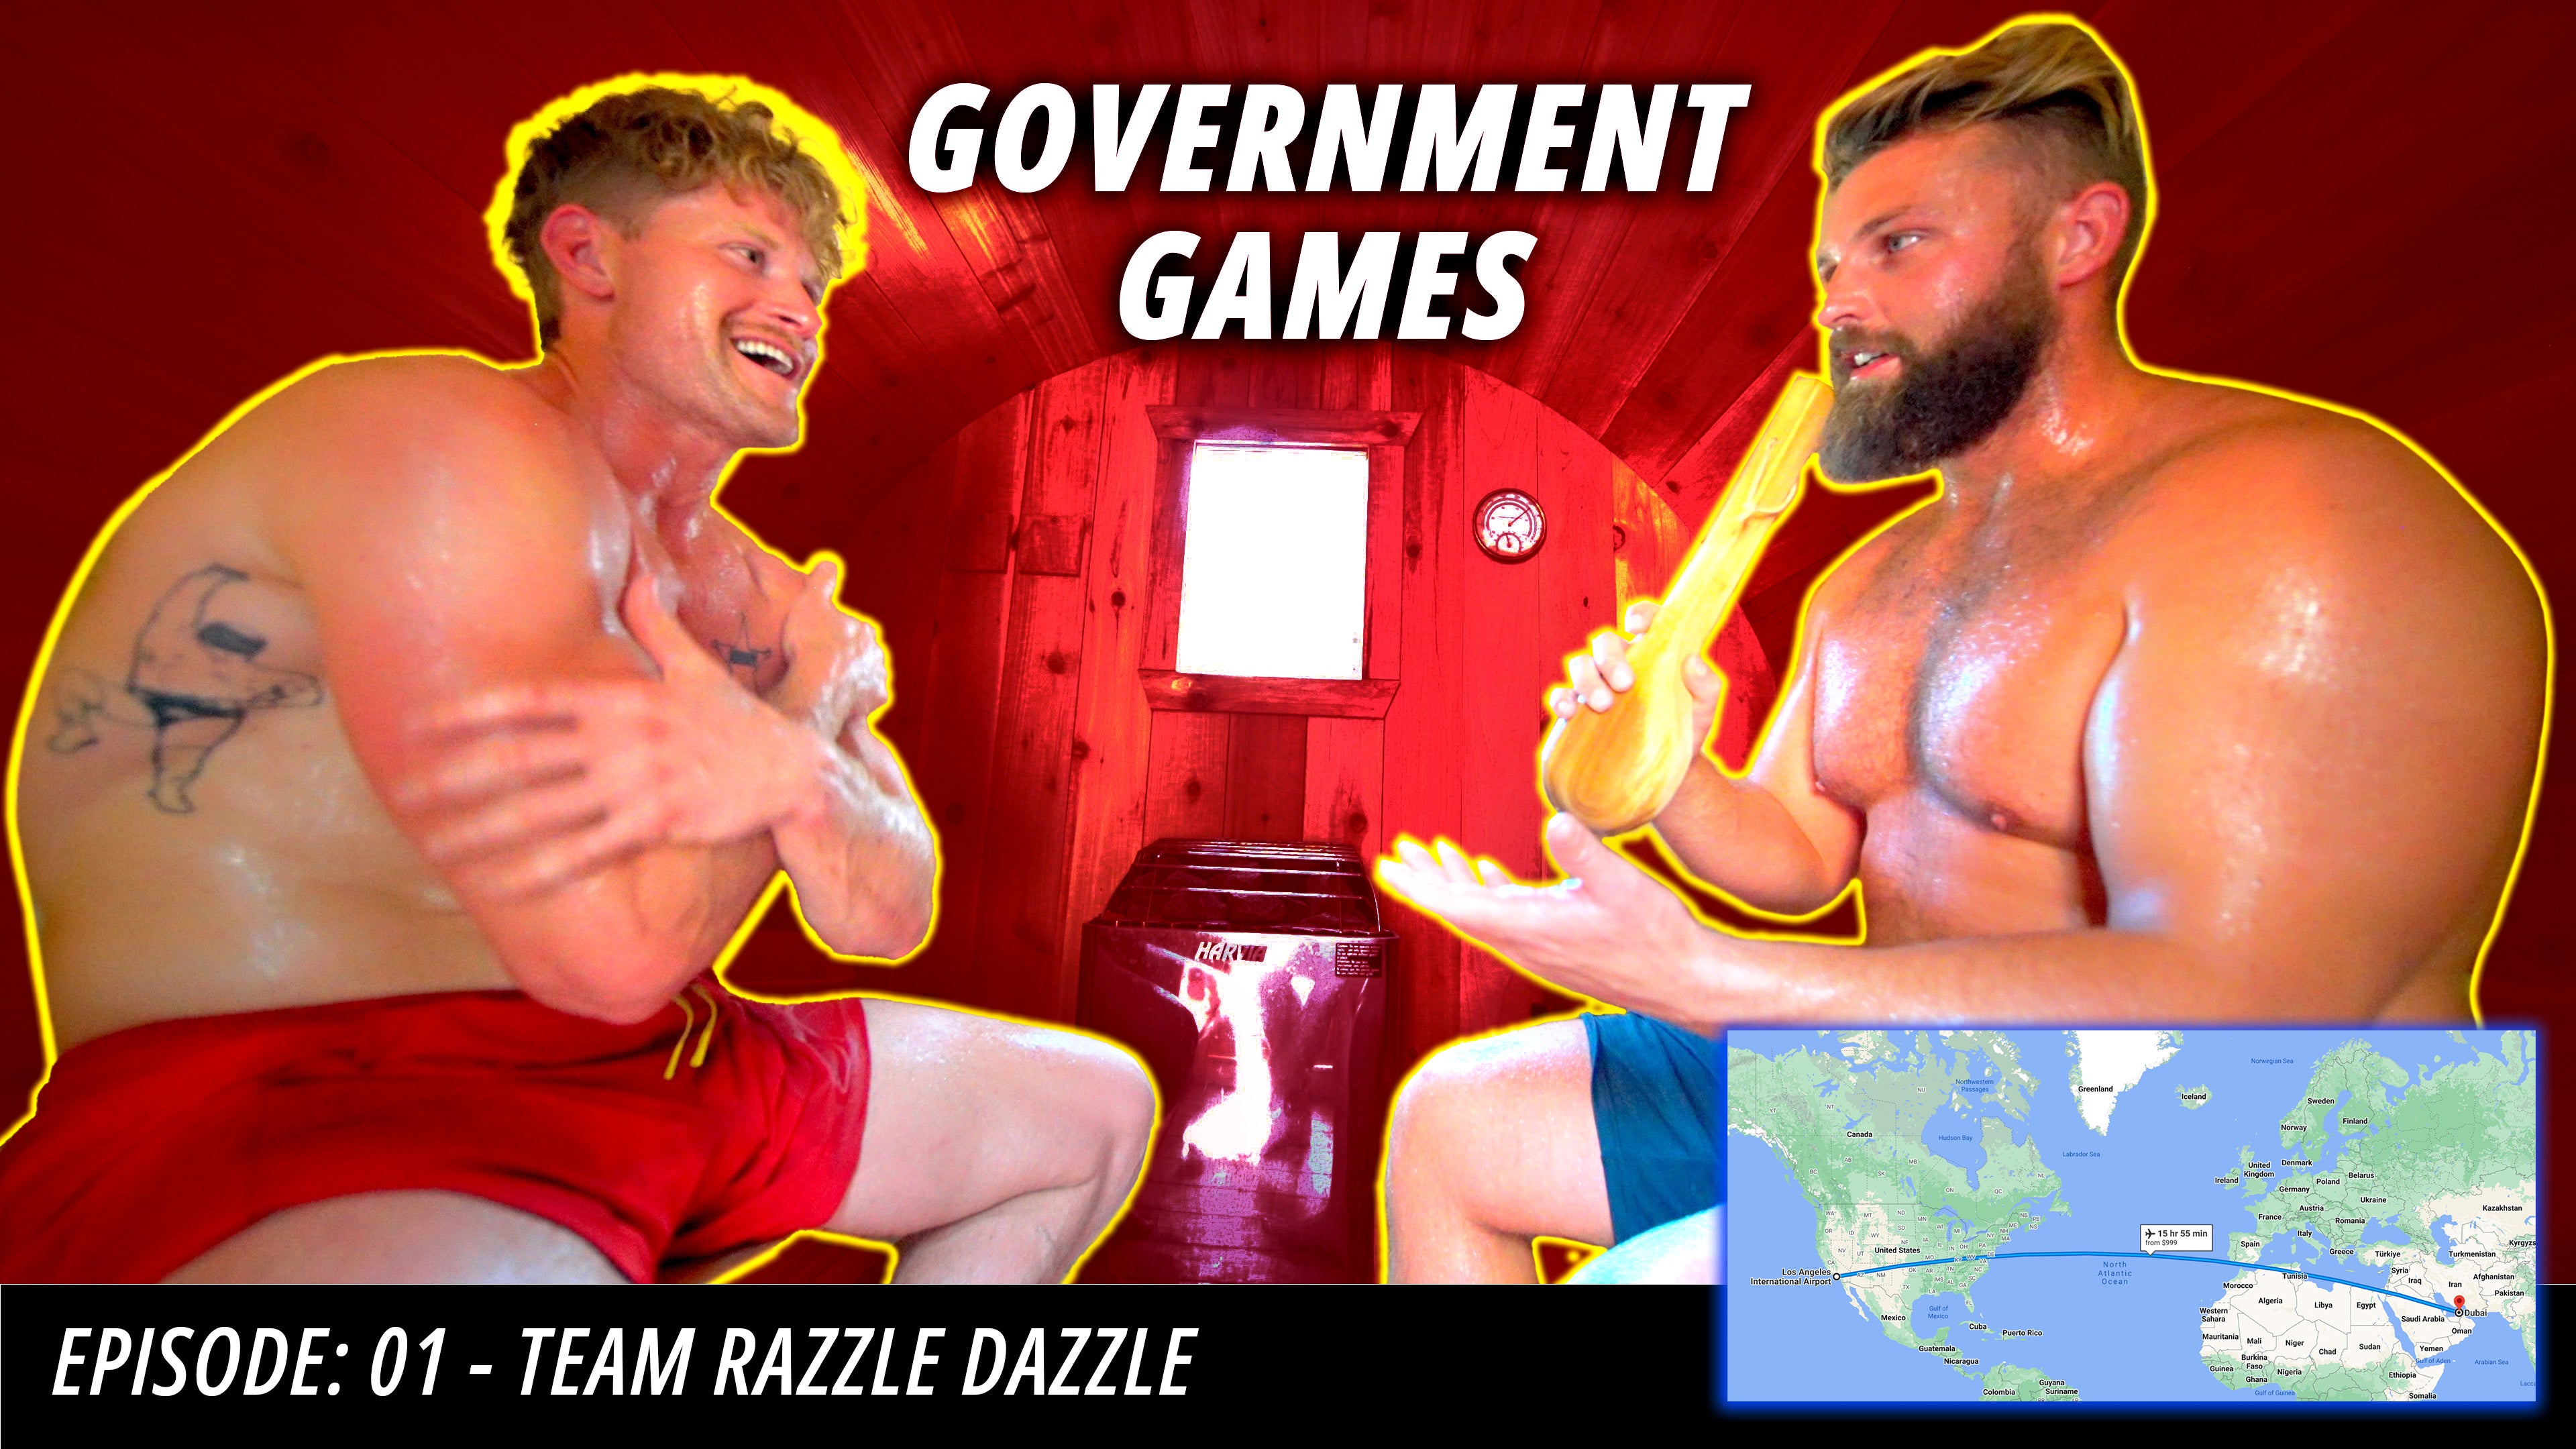 Is My City Qualified for the Government Games?